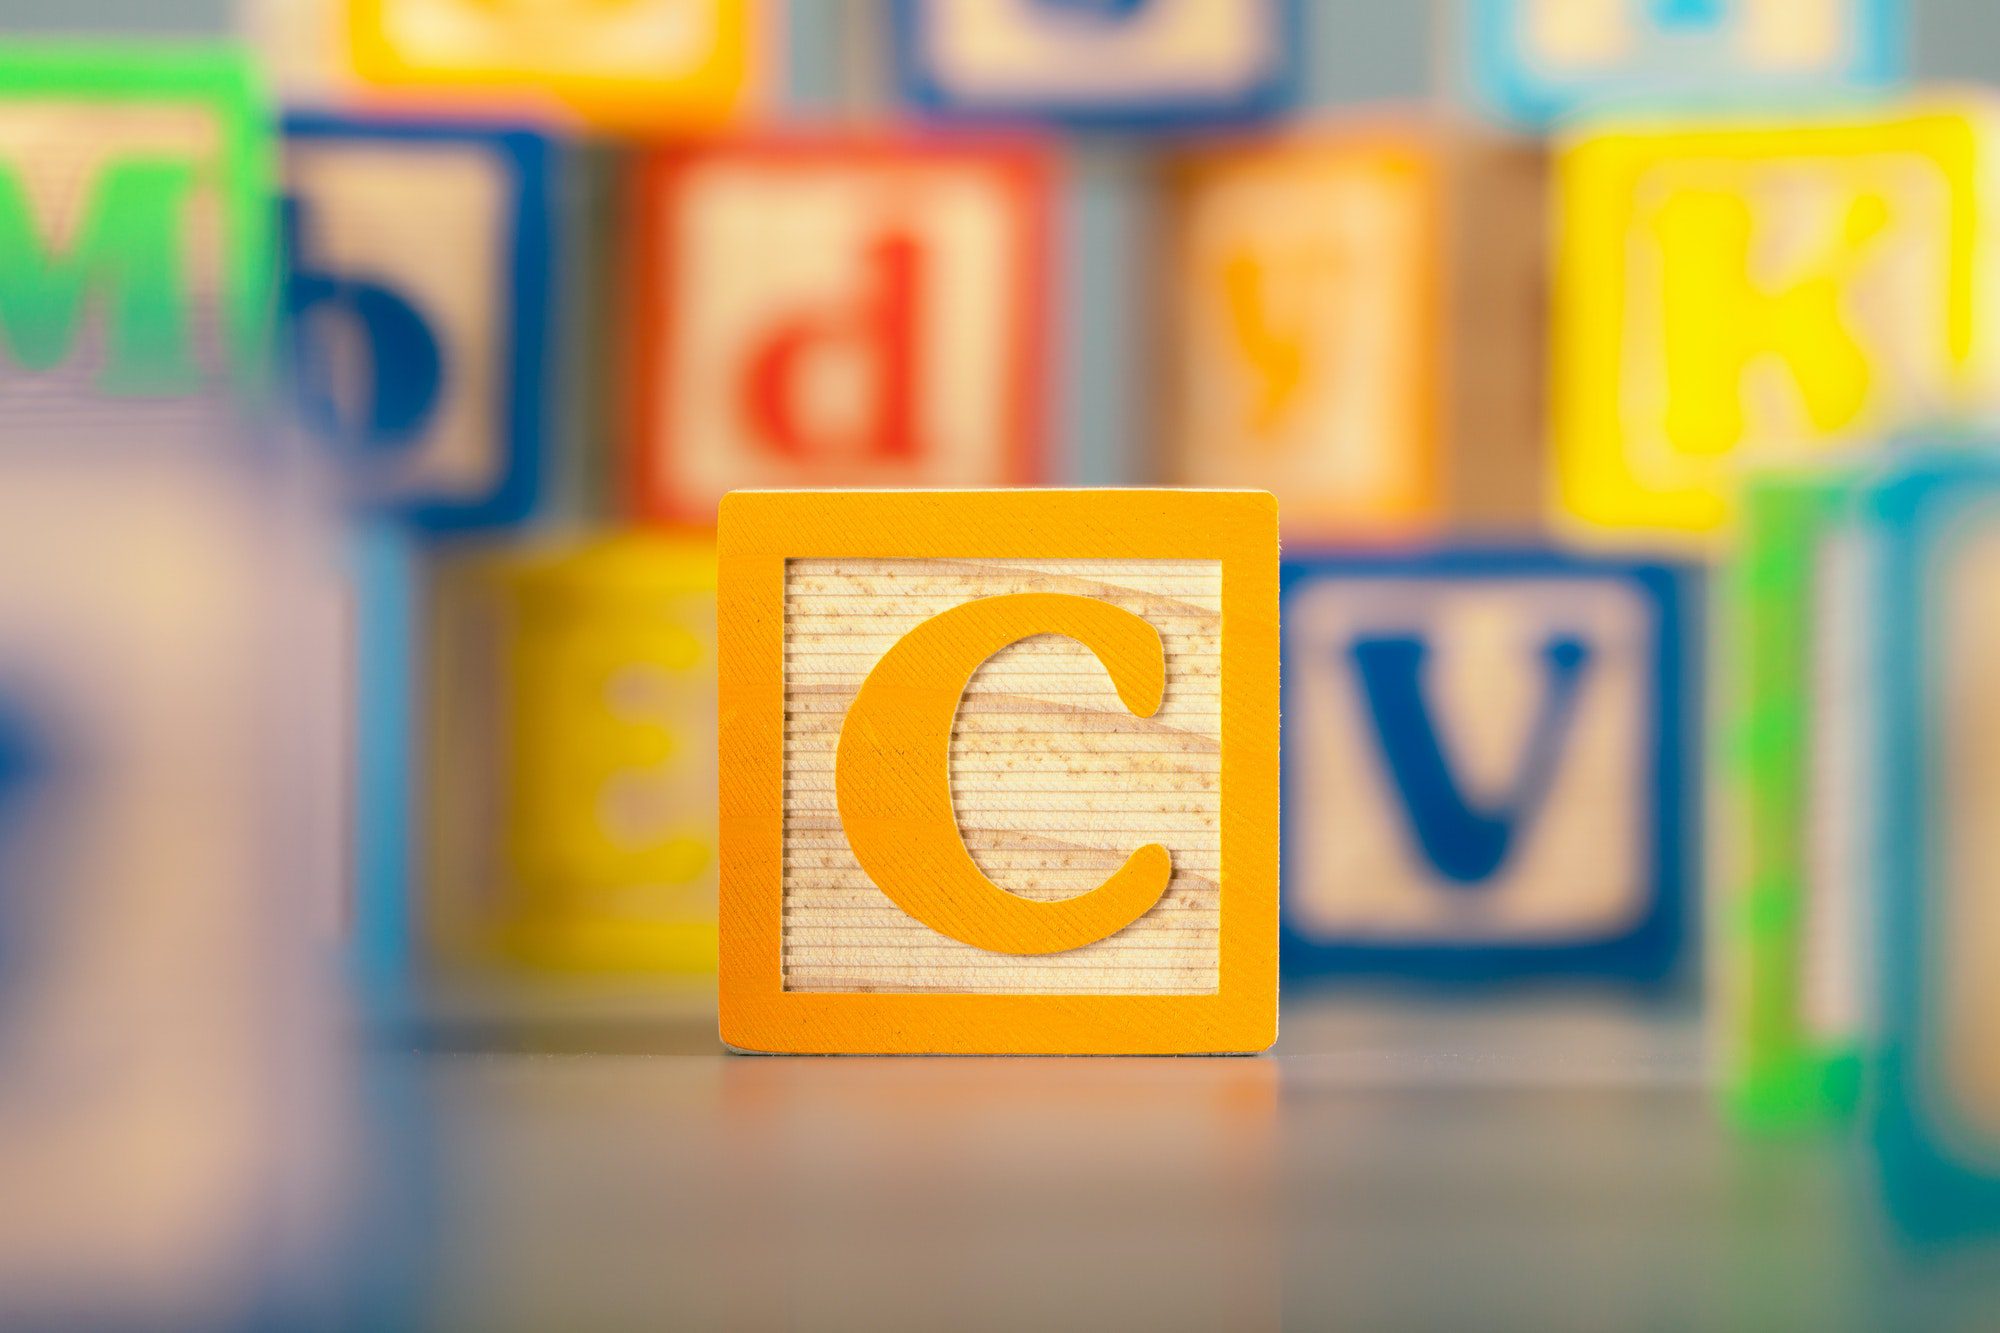 Photograph of colorful Wooden Block Letter C representing Medicare Part C plans work